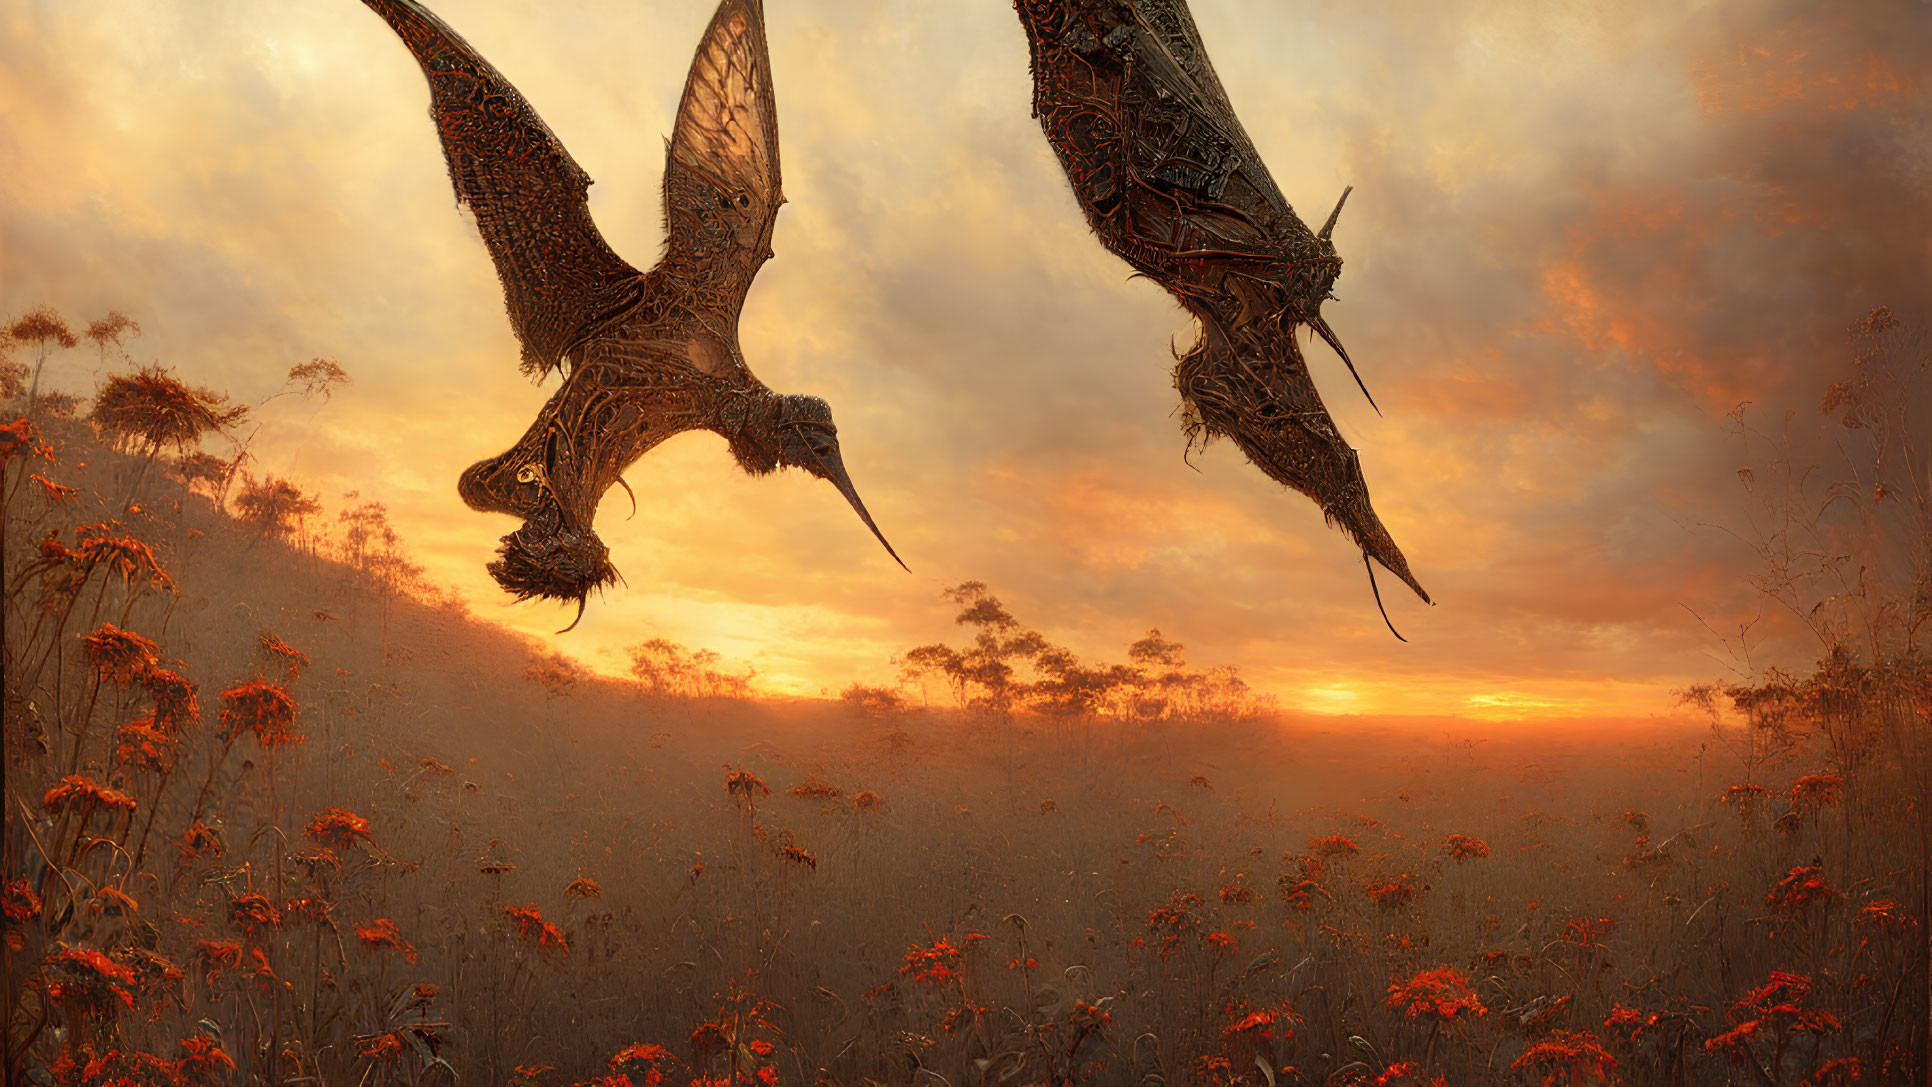 Digital artwork: Two dragon-like creatures flying over sunset field.